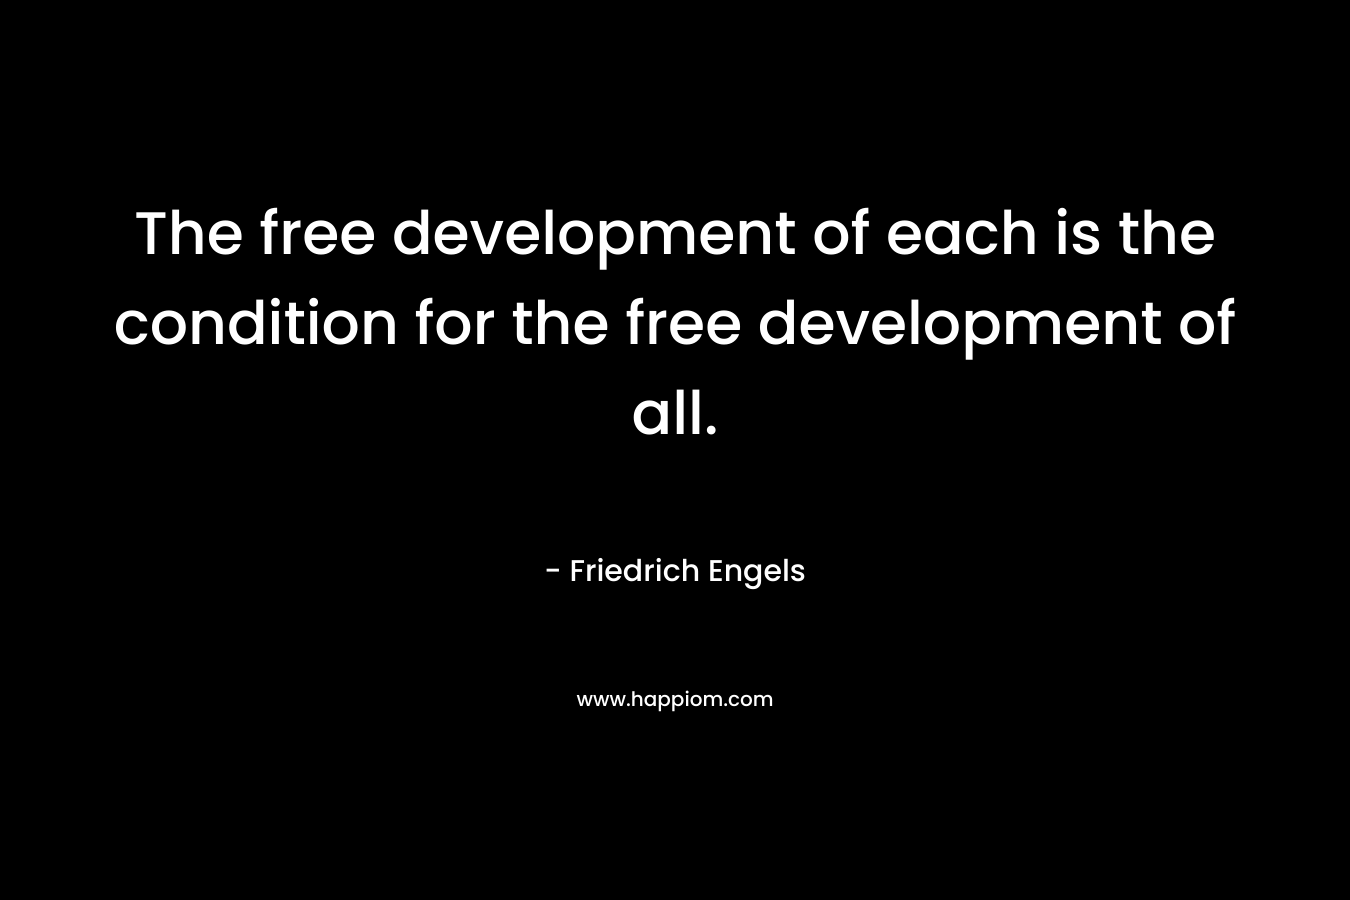 The free development of each is the condition for the free development of all. – Friedrich Engels